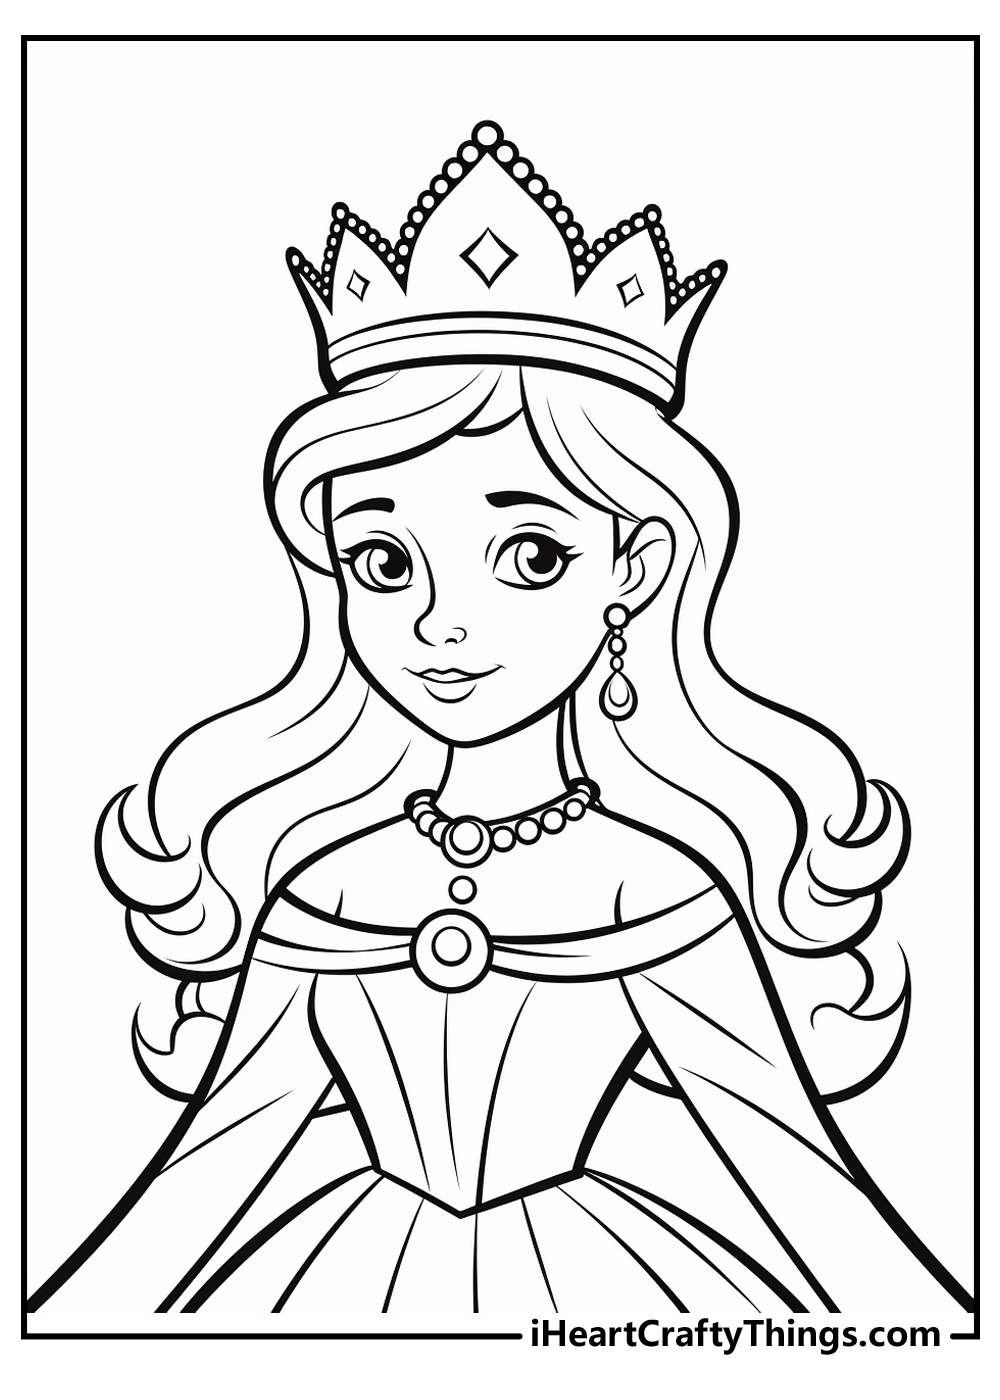 Queen coloring pages free printables